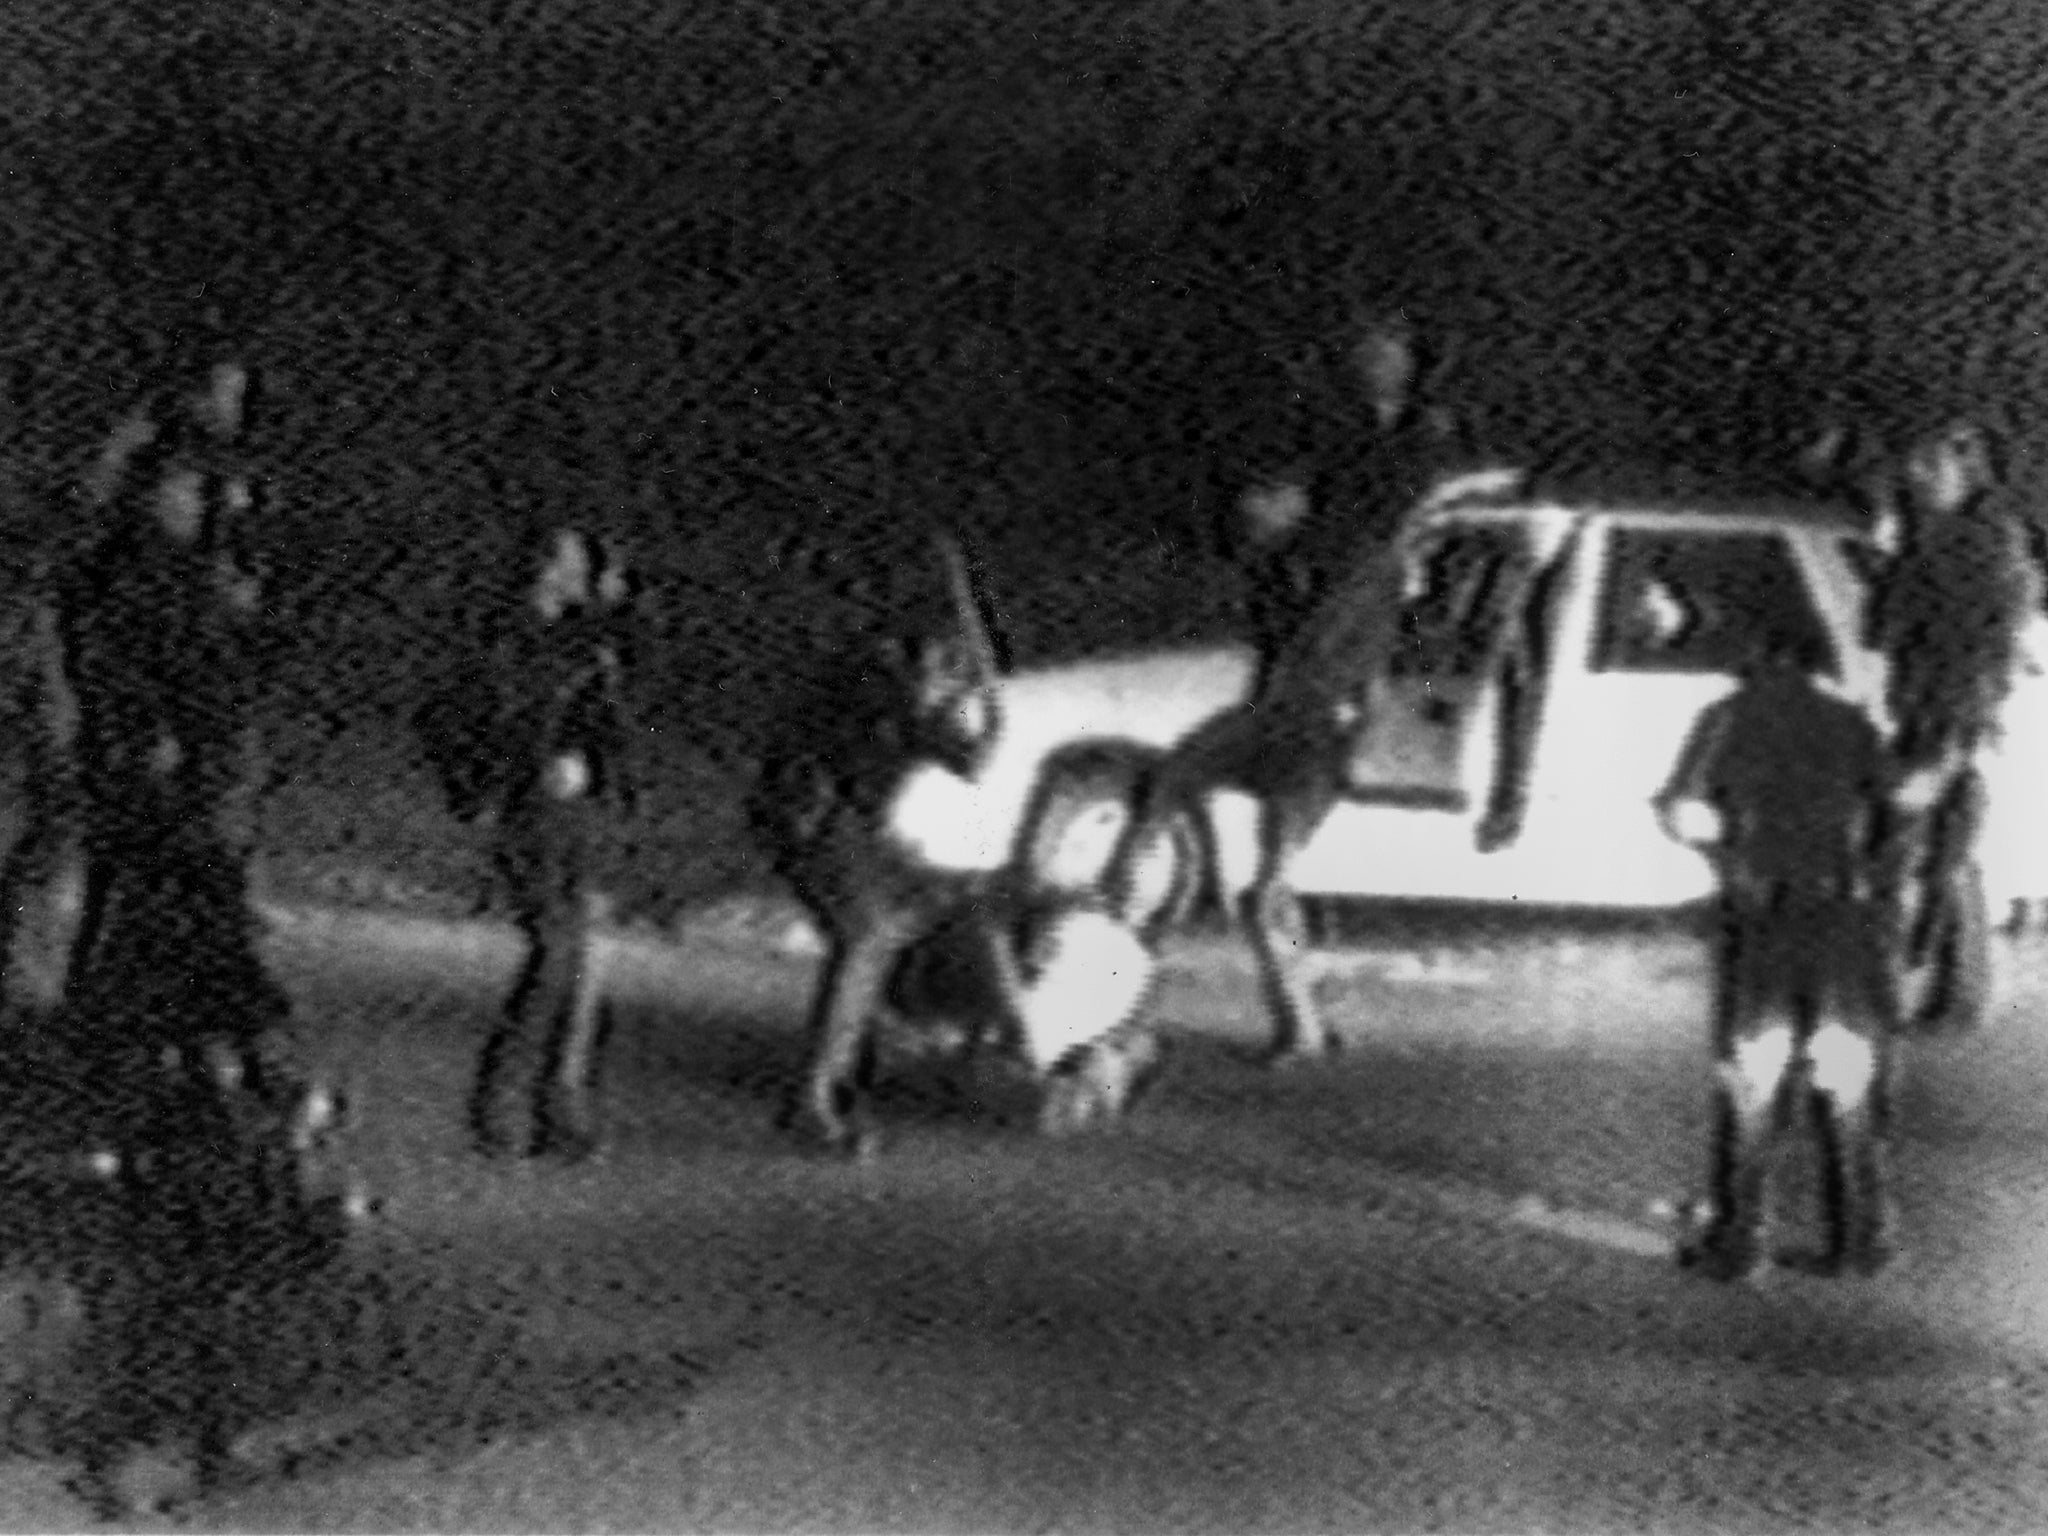 Footage of Rodney King being beaten by LAPD officers in 1991